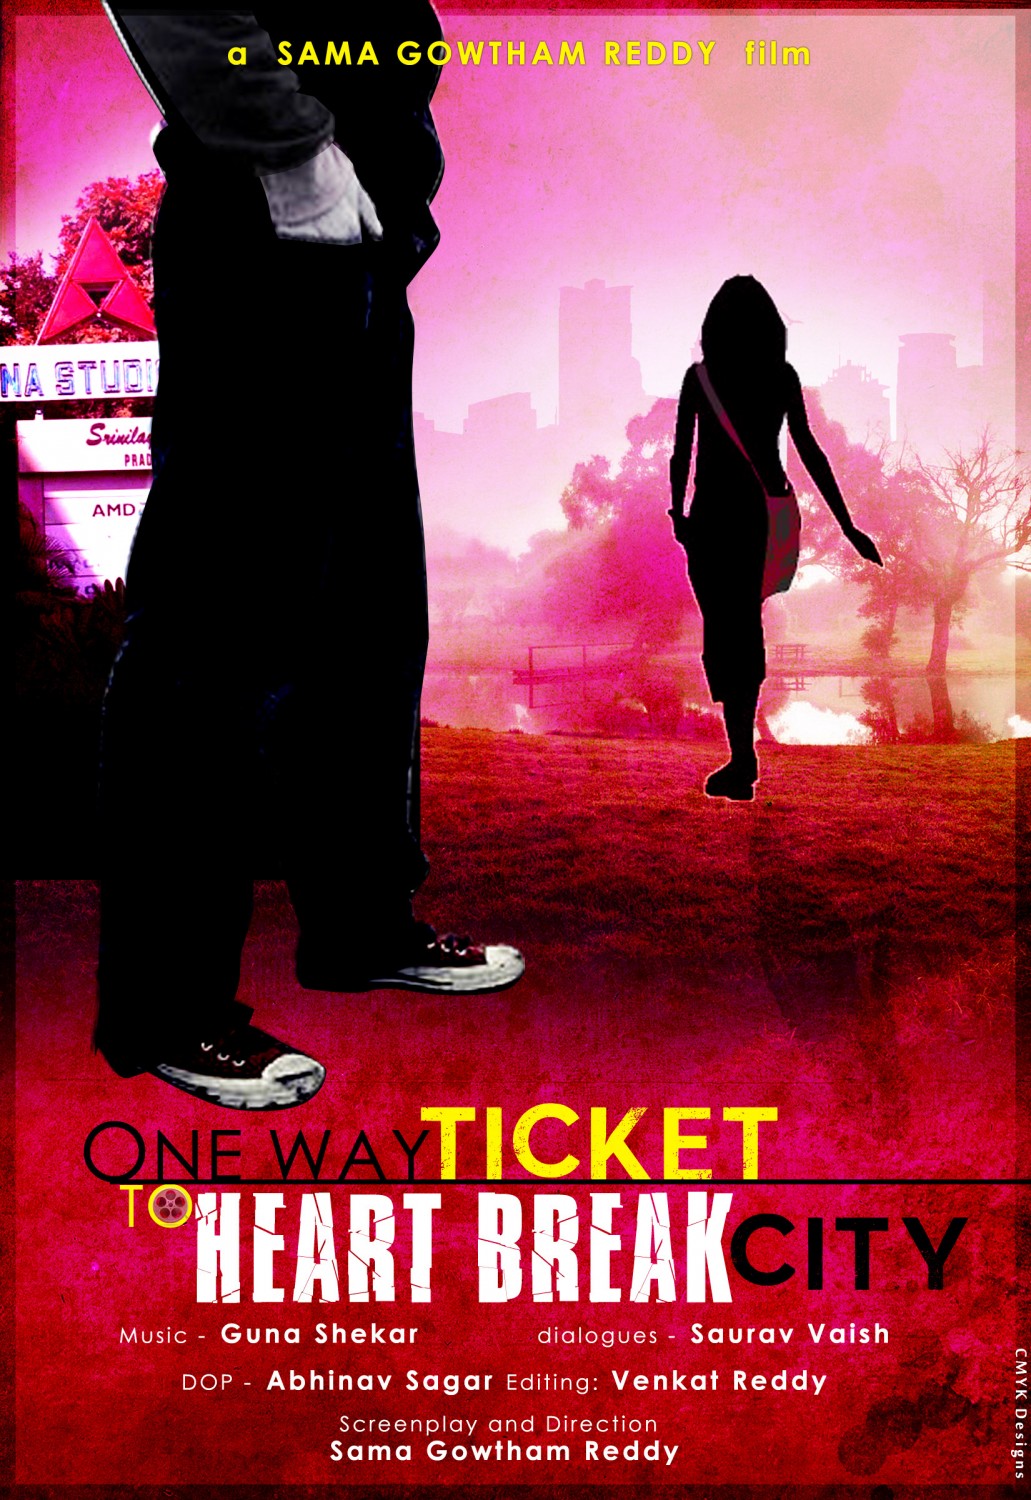 Extra Large Movie Poster Image for One Way Ticket to Heart Break City